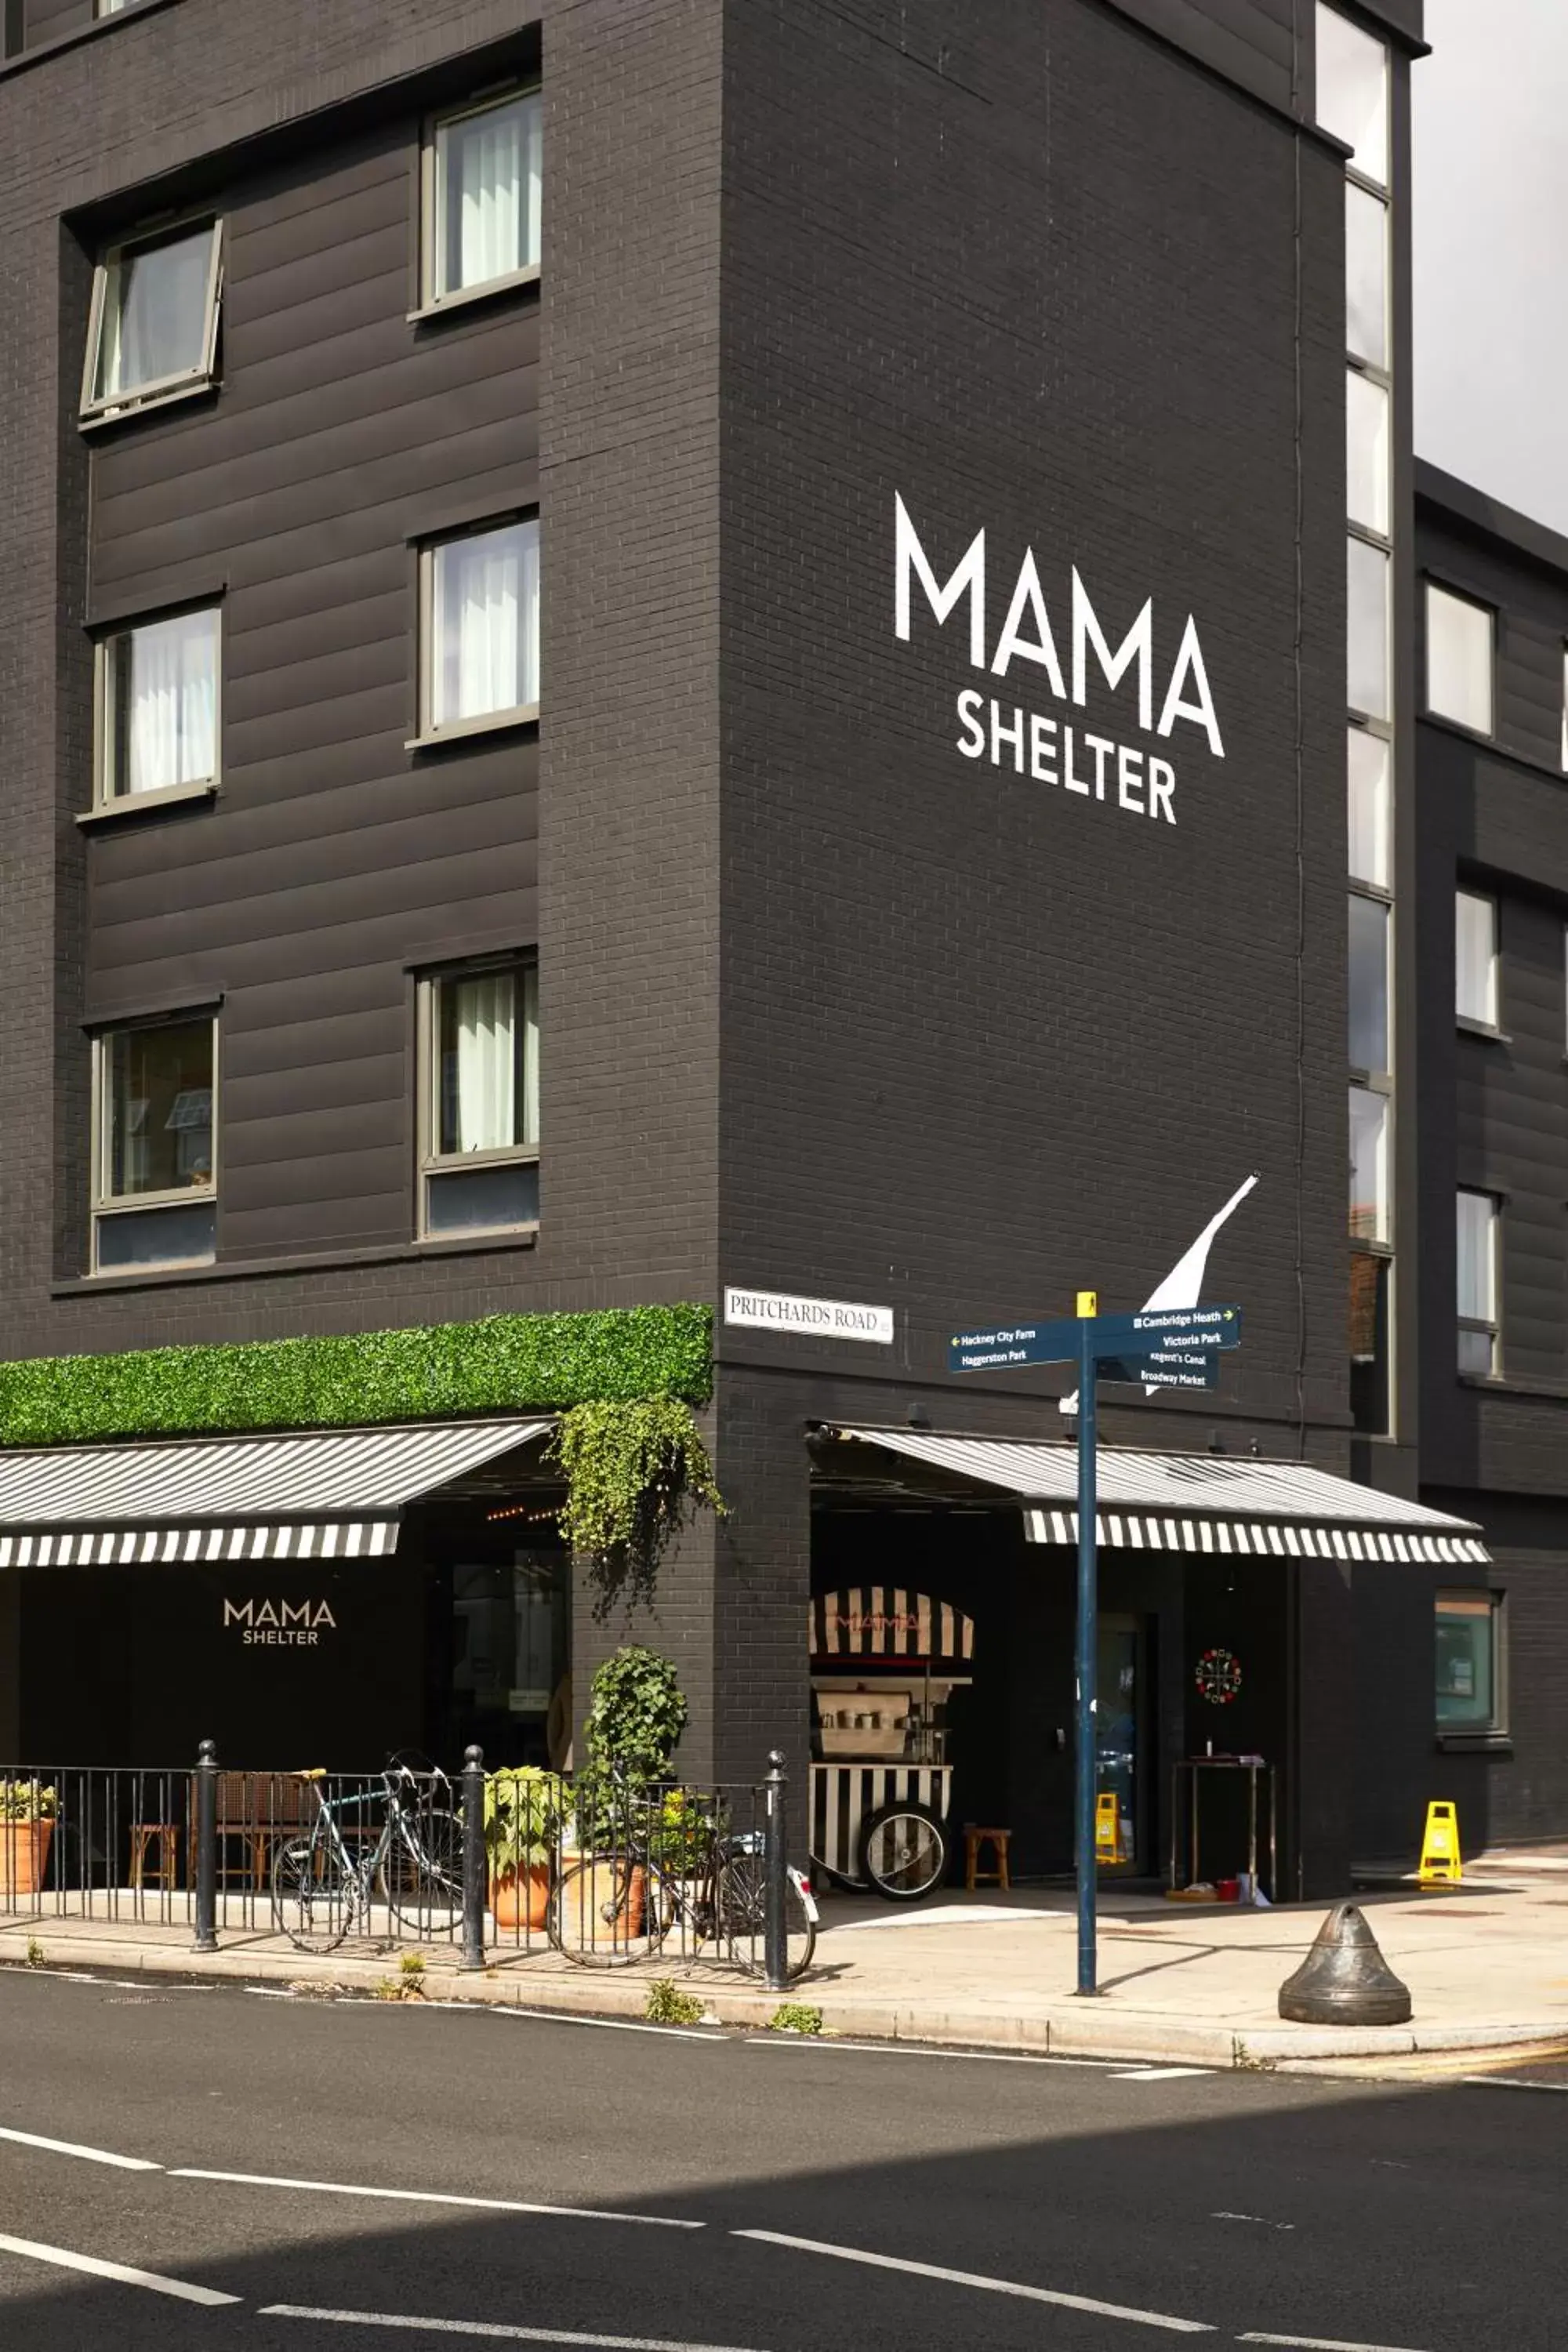 Property building in Mama Shelter London - Shoreditch